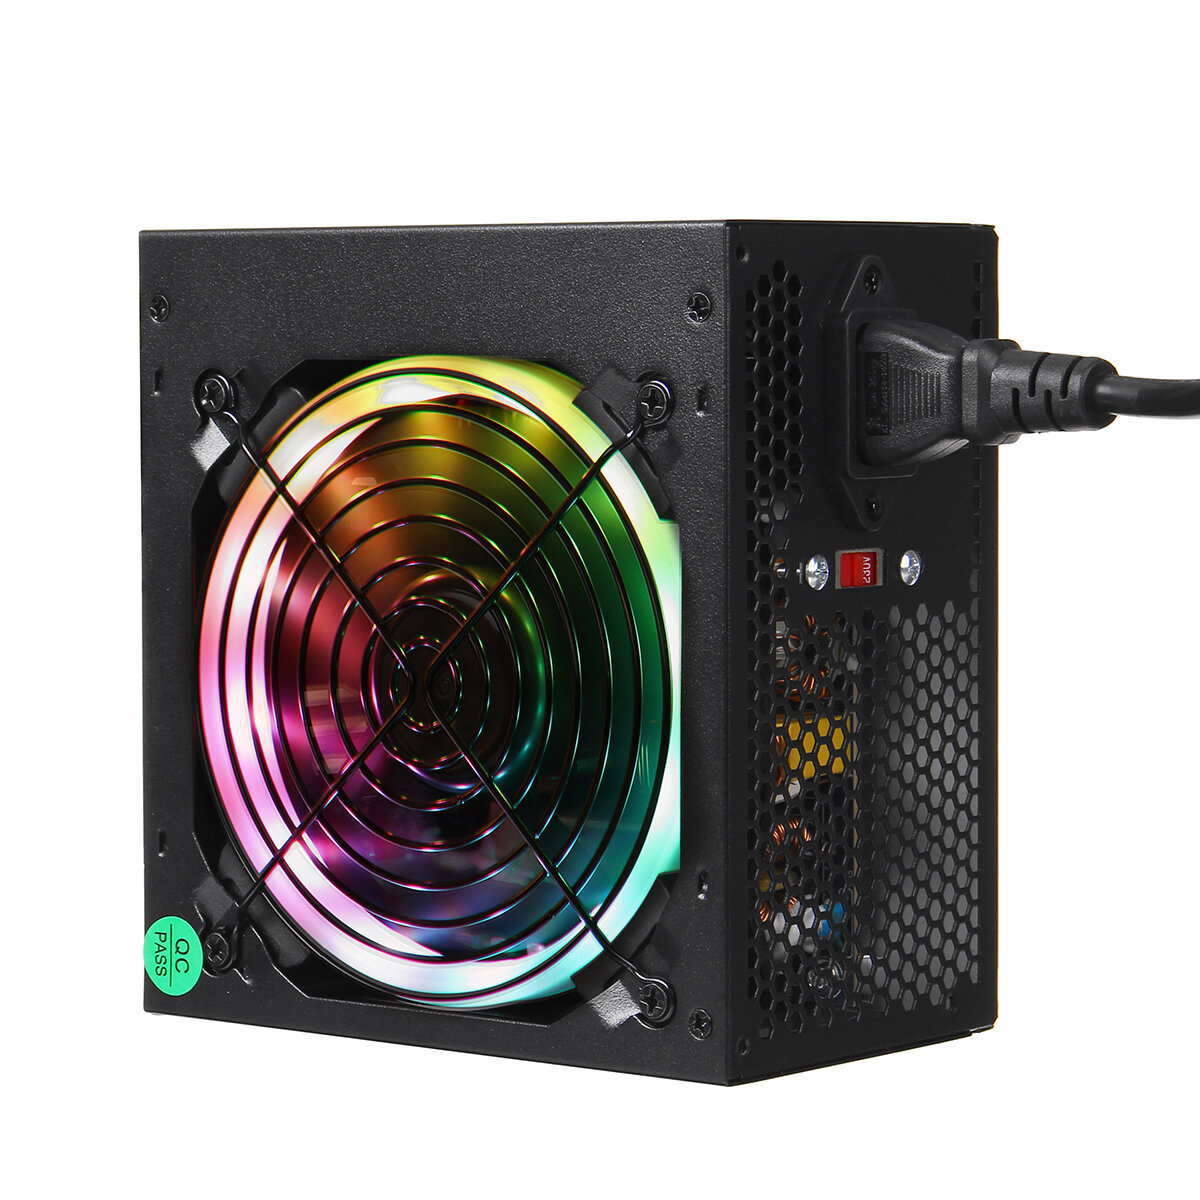 800W PC Power Supply RGB LED 12CM Silent Cooling Fan ATX 12V 24Pin PC Desktop Computer Power Supply PCI SATAfor AMD In